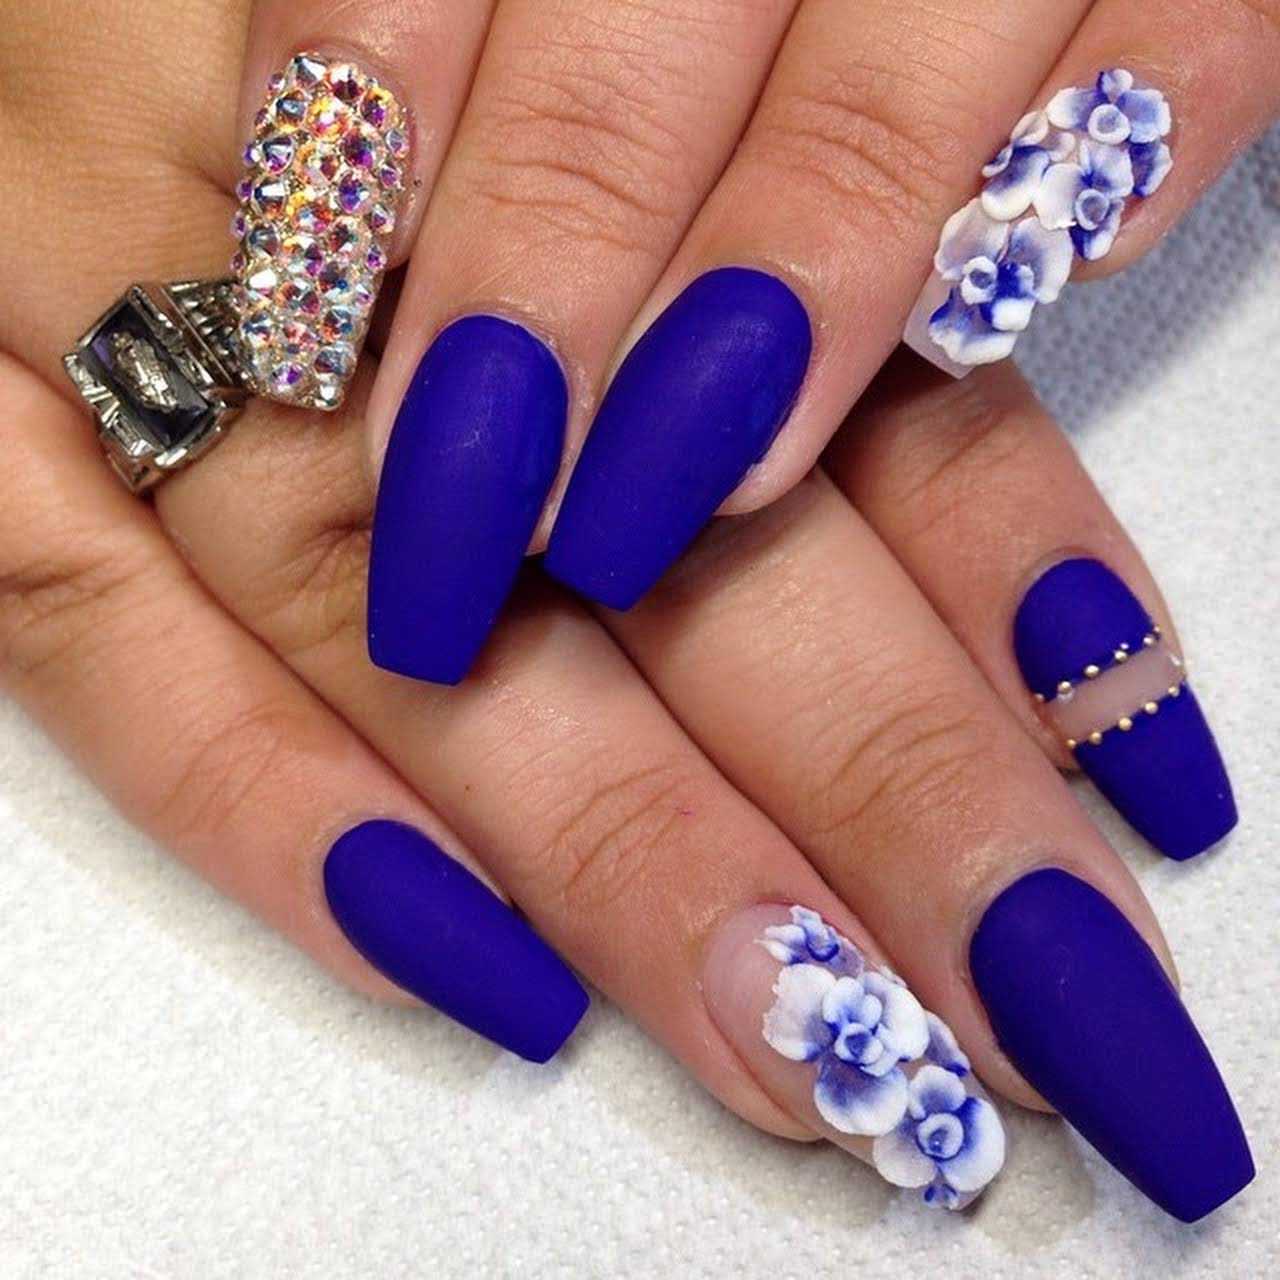 3D floral Acrylic Nails in blue.. 90+ Hottest 3D Acrylic Nails With Flower Designs - 2 3D acrylic nails with flower designs